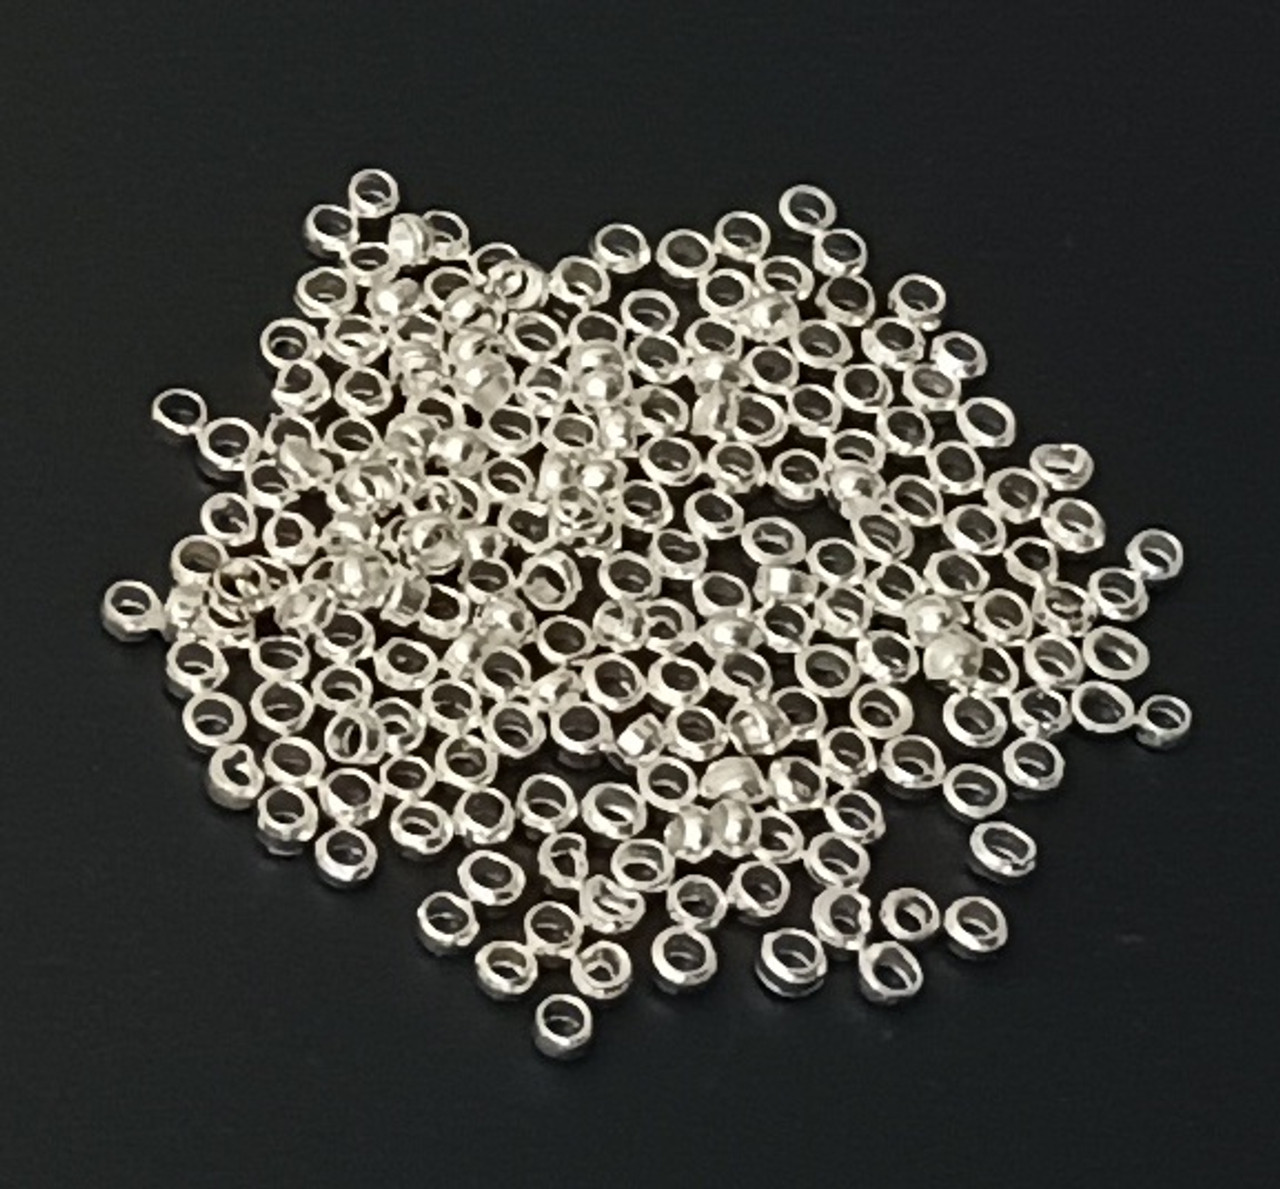 100 - 1x2mm Silver-Plated Crimp Beads